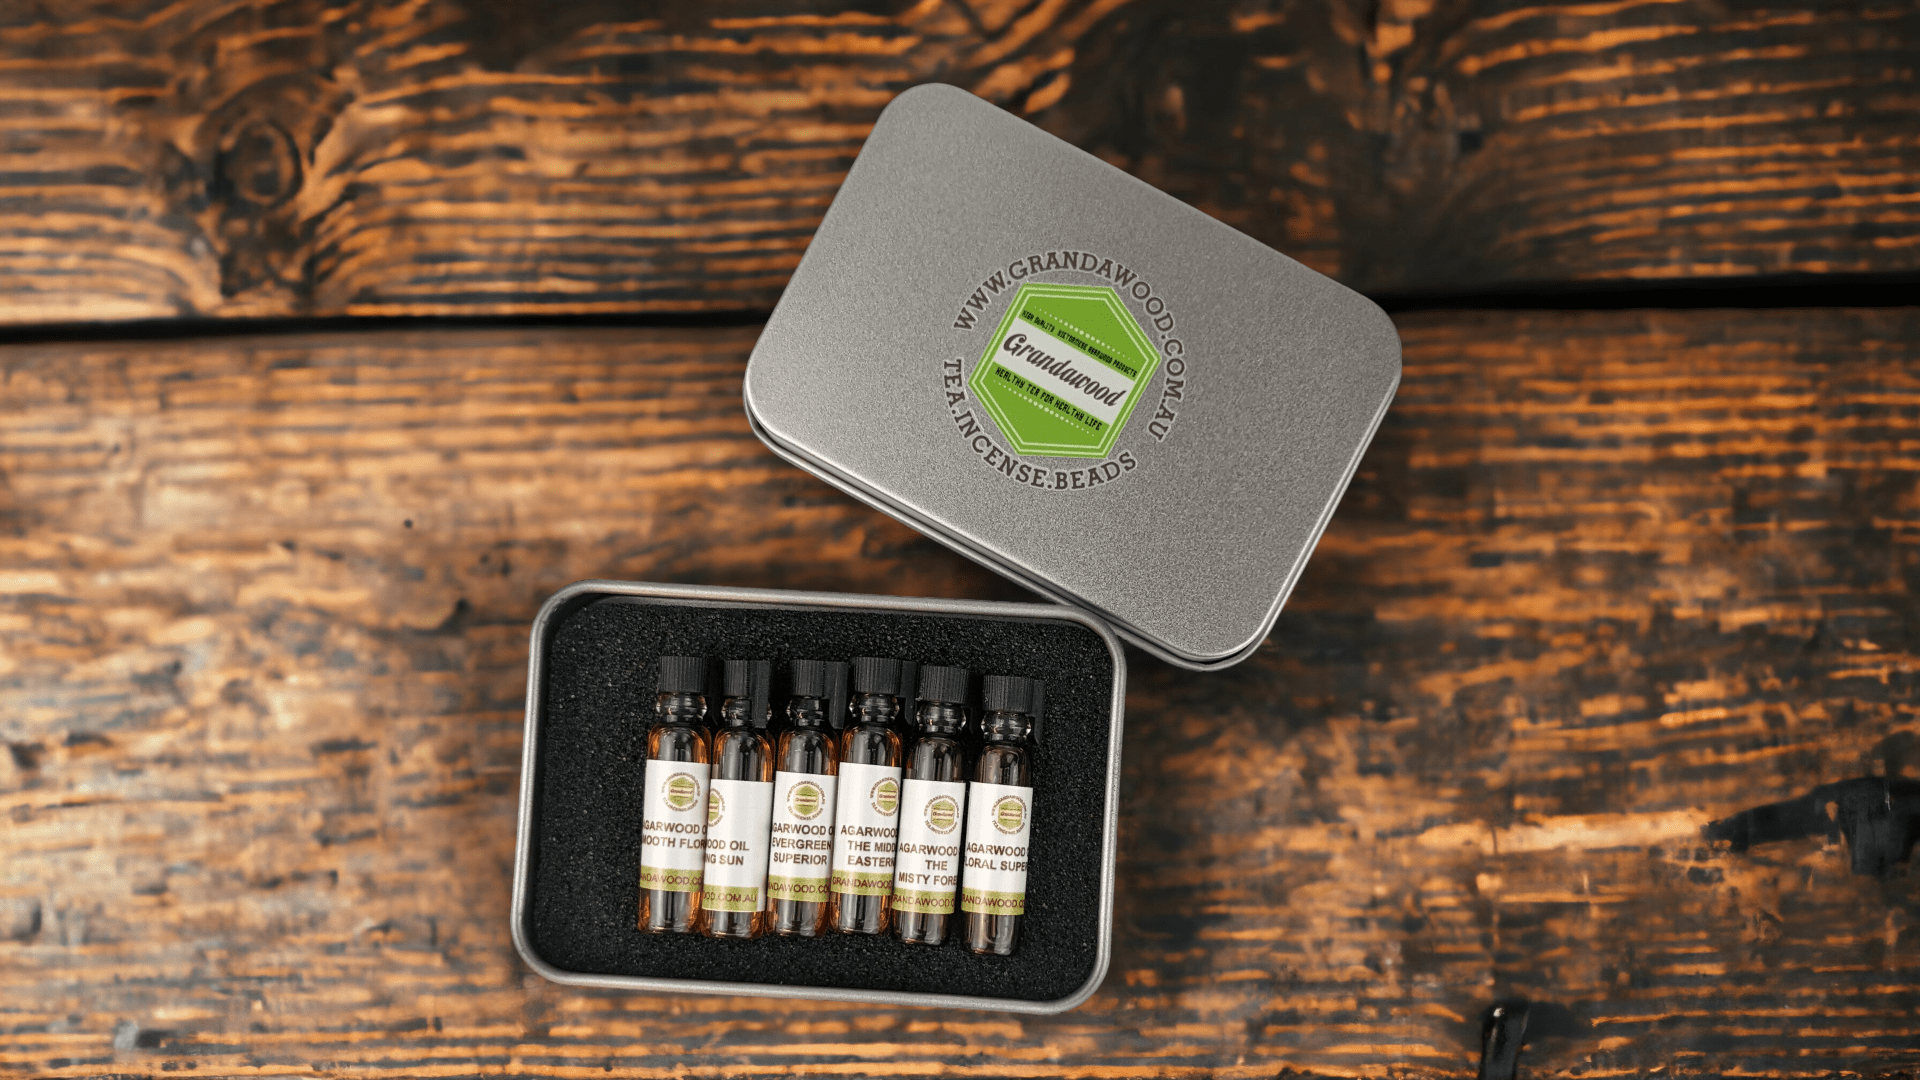 Agarwood (Oud) Essential Oil Sample Kit- To people who want to smell genuine Oud but can't get started - Cultivated Agarwood (Oud) Oil / 6 oils x 0.5ml each